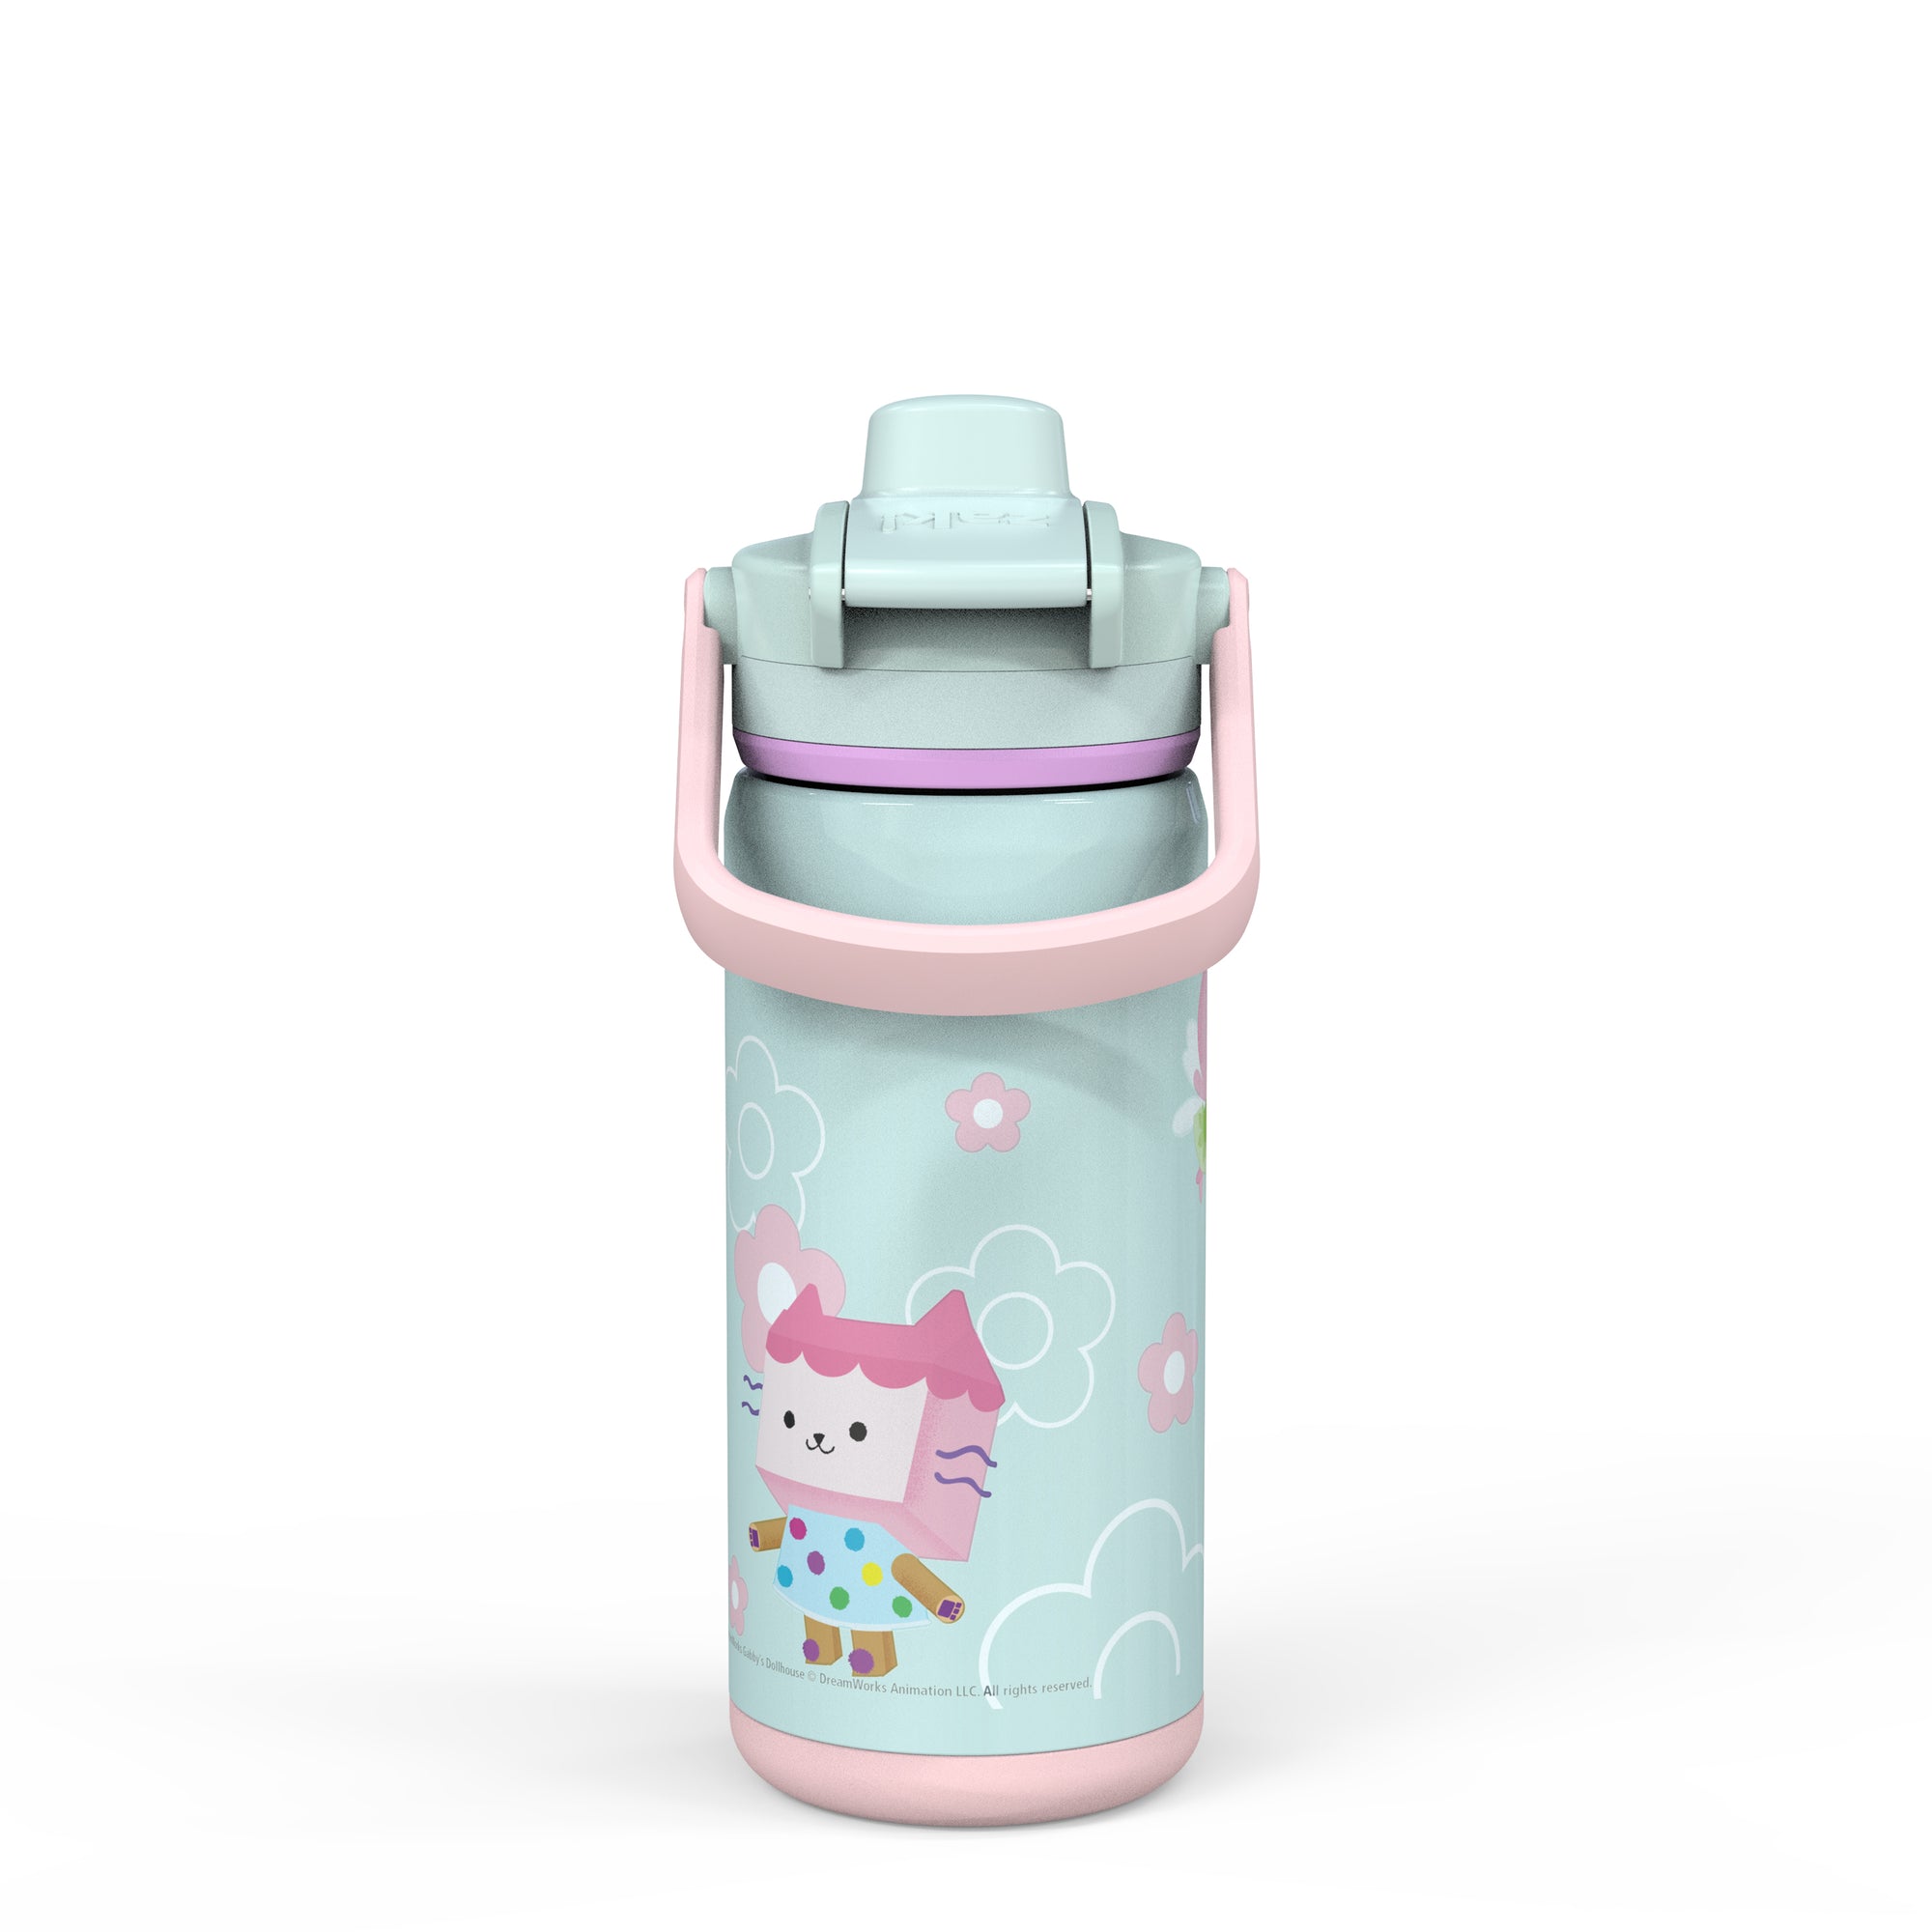 Gabby&#39;s Dollhouse Beacon Stainless Steel Insulated Kids Water Bottle with Covered Spout, 14 Ounces